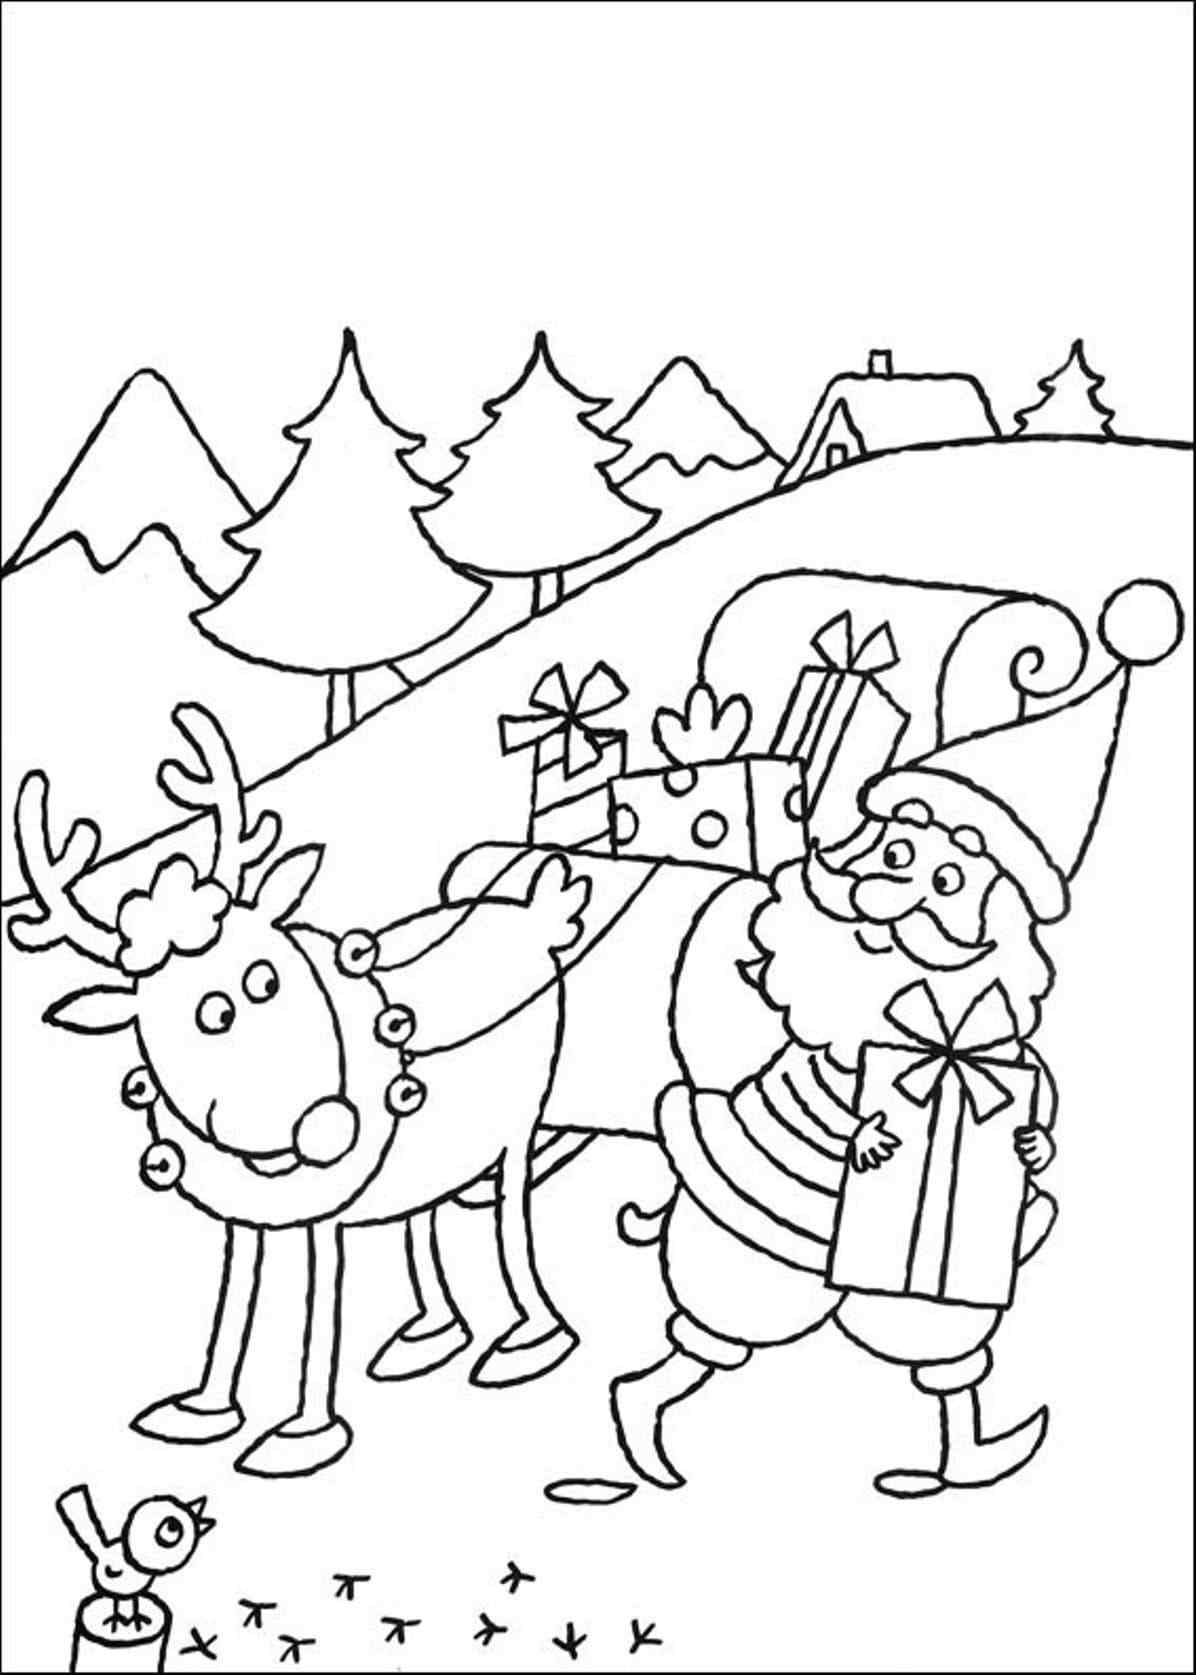 Deer Obediently Waits For Him Coloring Page